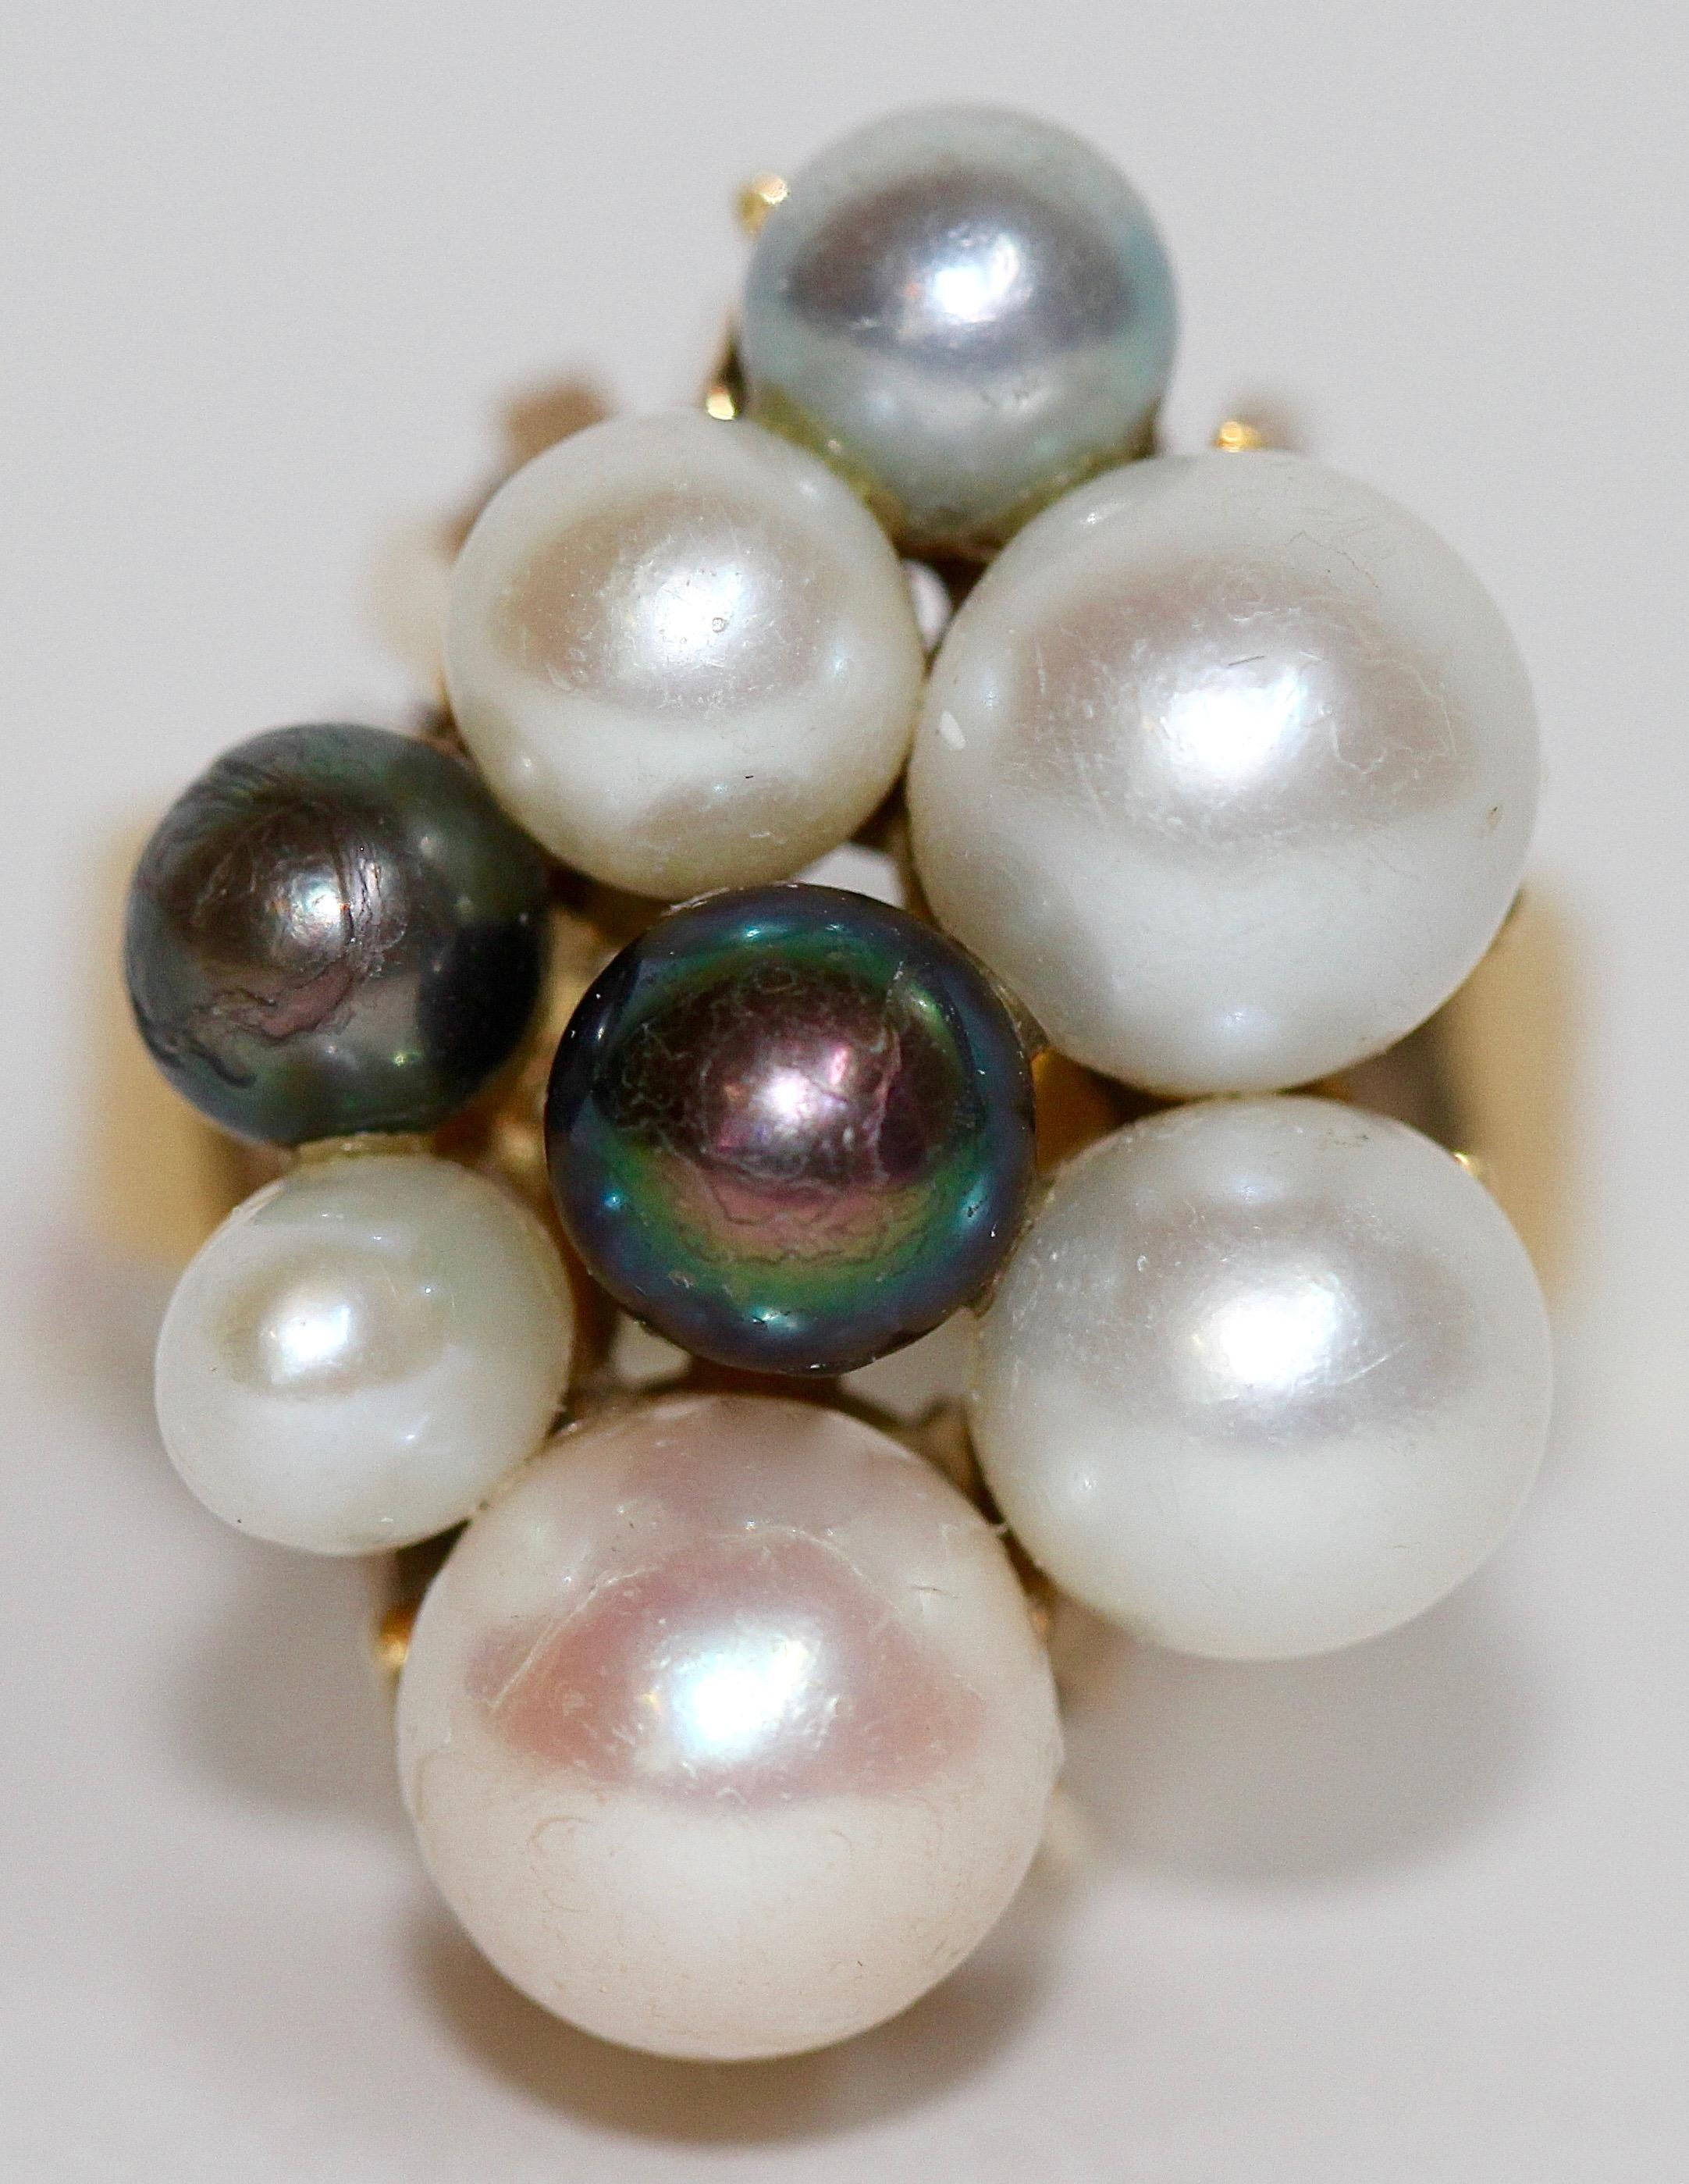 18ct yellow gold ring set with eight different natural pearls.
Ring size (diameter) 17mm. Rather for petite fingers.